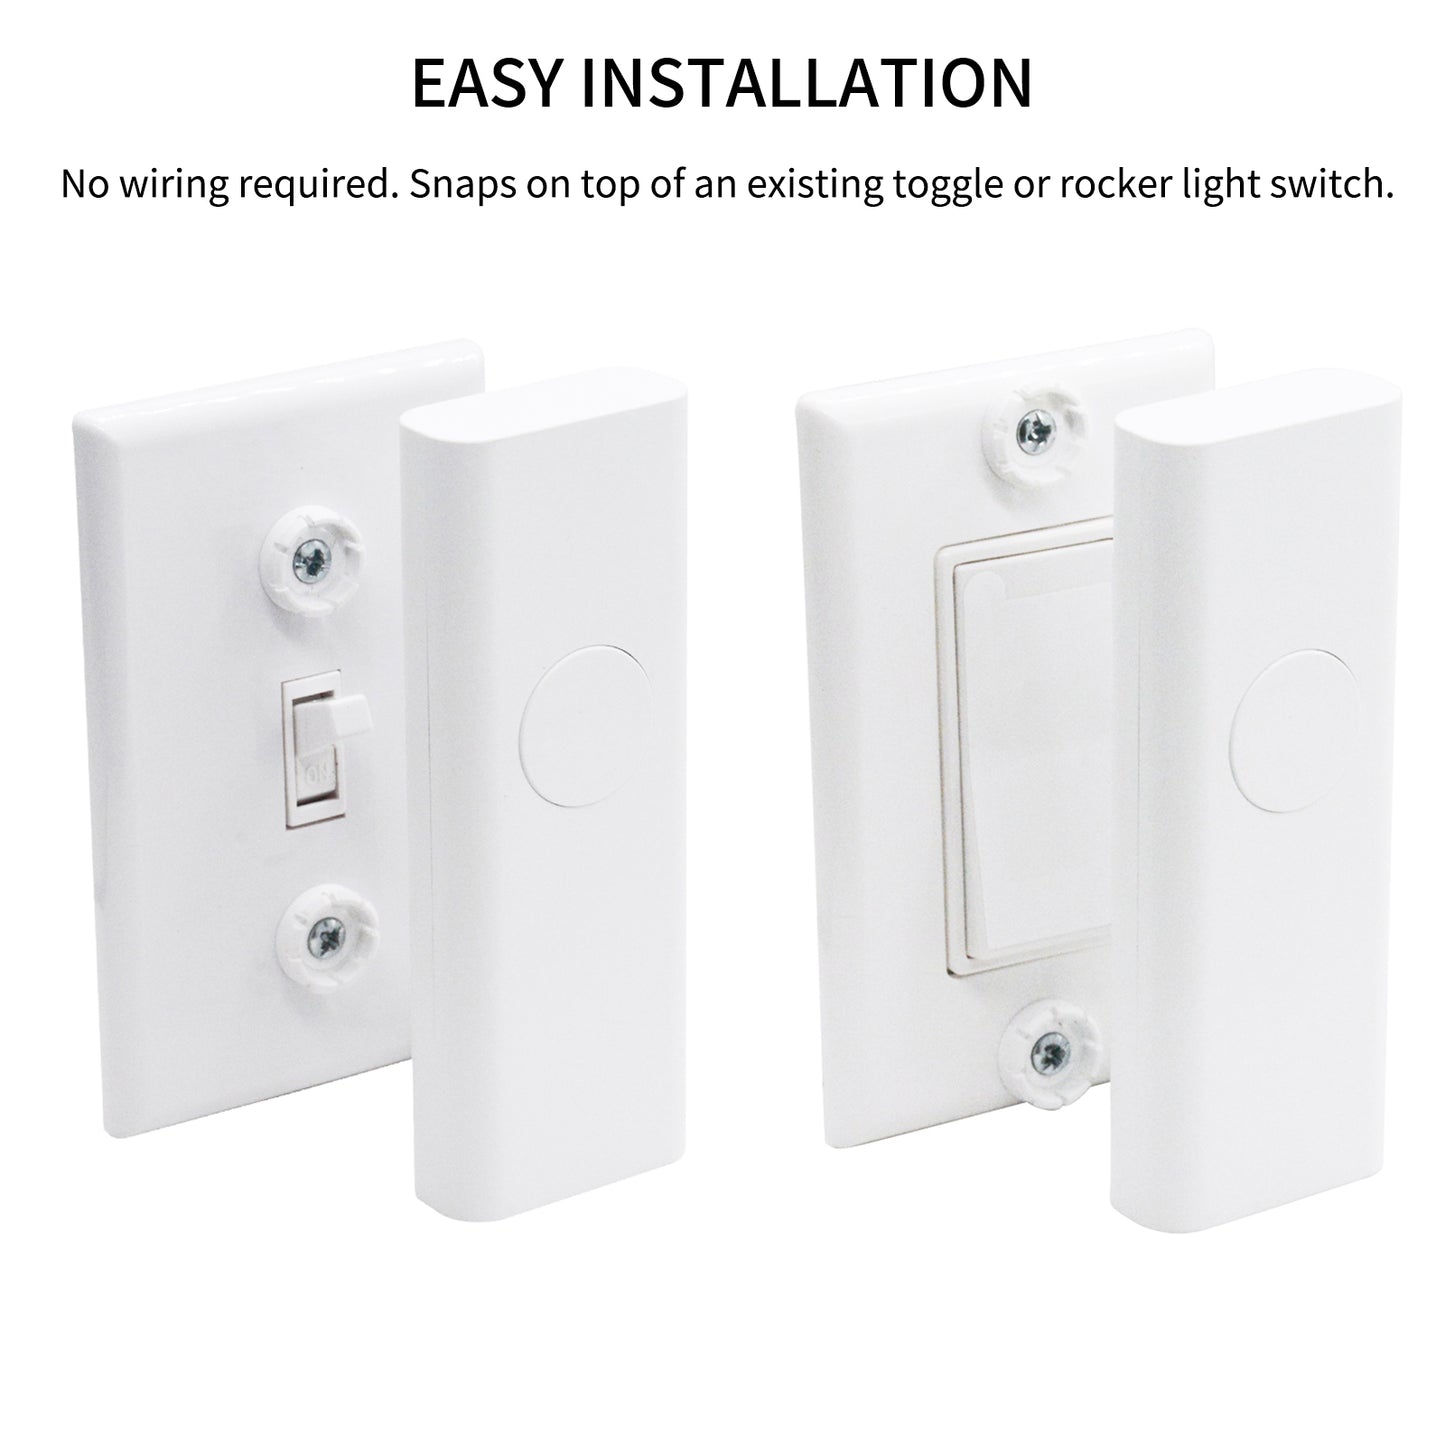 Smart Switch - for Rocker or Toggle